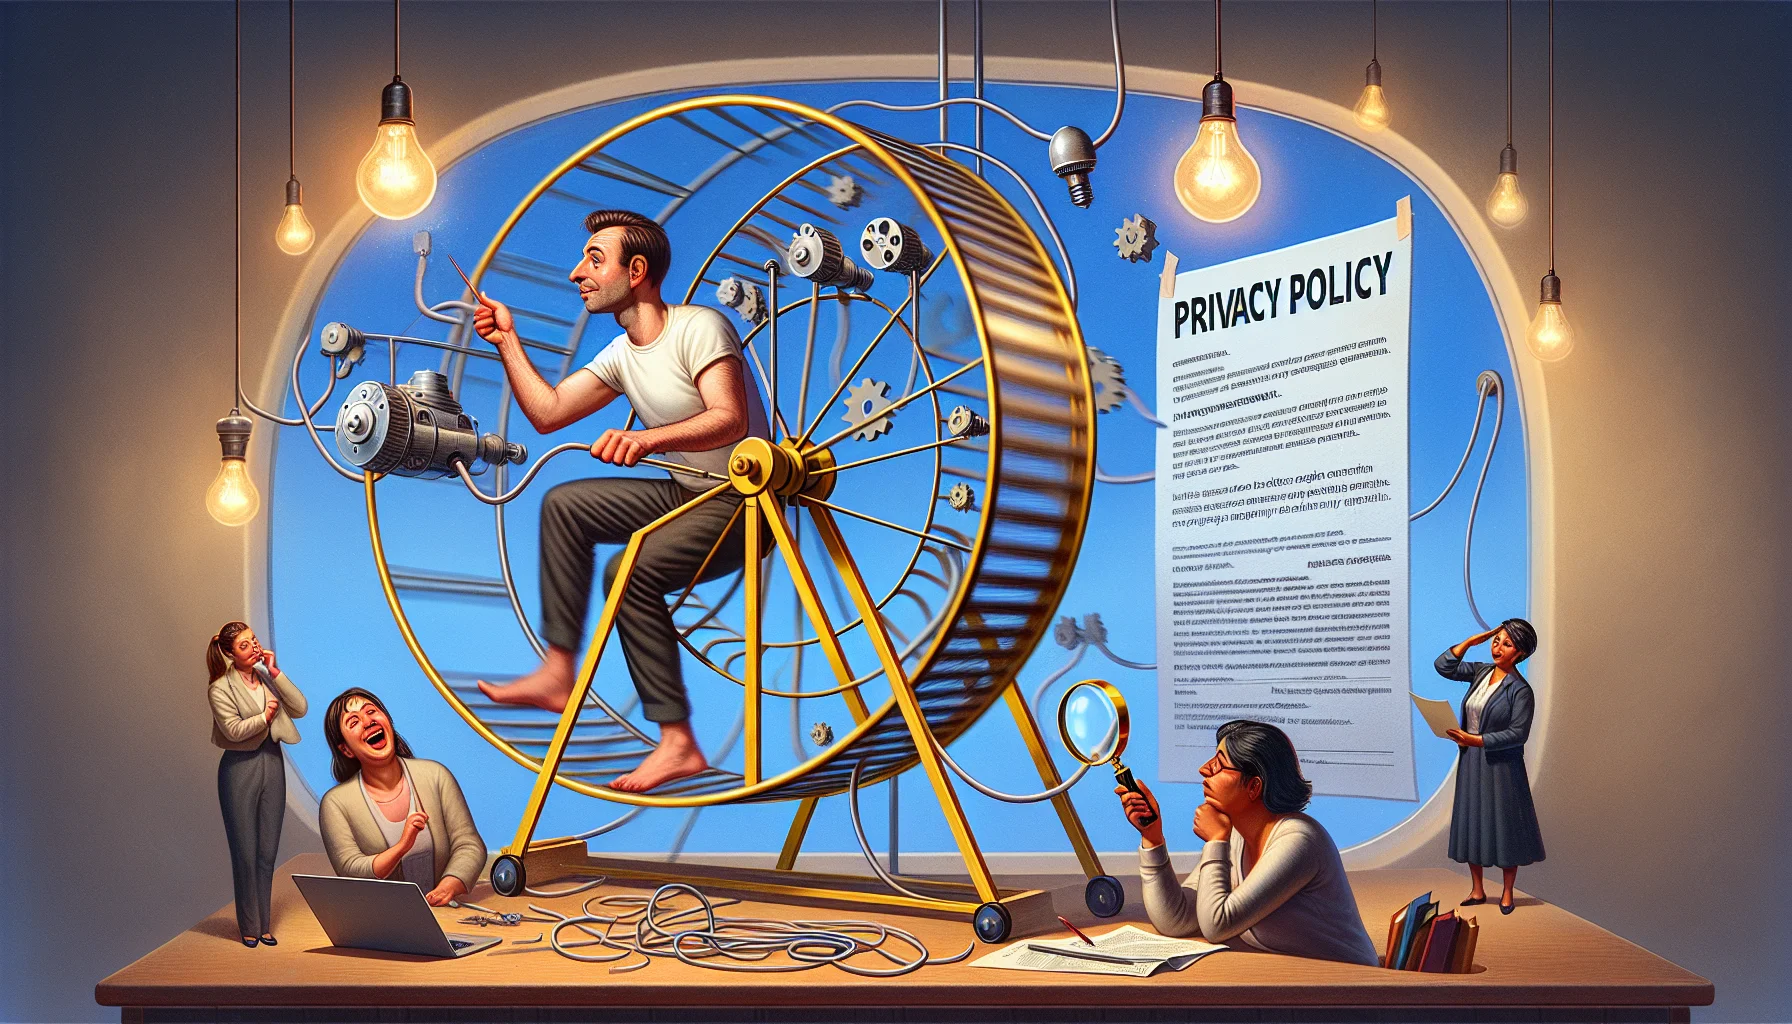 Create a humorous, realistic scene depicting an enticing opportunity to generate electricity in relation to privacy policy. Picture a man with a Caucasian descent, spinning a large hamster wheel that's interconnected with wires and light bulbs, reducing energy bills. Also, there's a privacy policy document next to the wheel, comically oversized with a magnifying glass revealing its fine print. On one side, a woman of South Asian descent is laughing and pointing towards the man in the wheel, and on the other side, a Black woman is taking a contemplative stance, analyzing the privacy policy document.